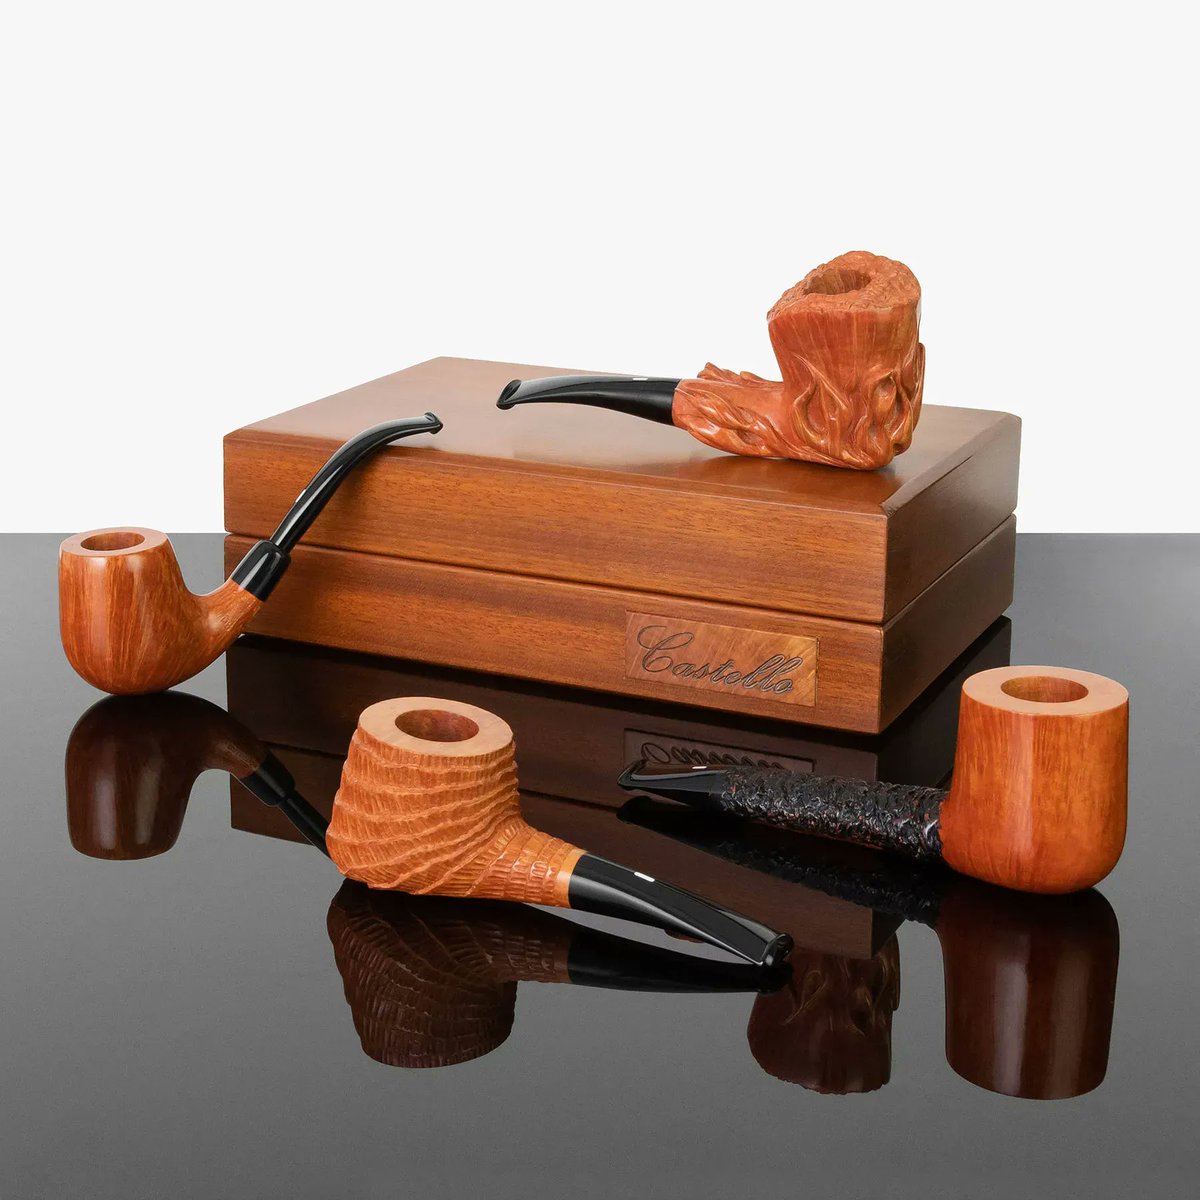 Today’s new Castello pipes span the workshop’s most prestigious series and most distinguished grades, including Flame and Fiammata examples, as well as Le Dune and Natural Vergin offerings. Get yours today!
smokingpip.es/Castello 
#smokingpipes #pipesmokers #castellopipes